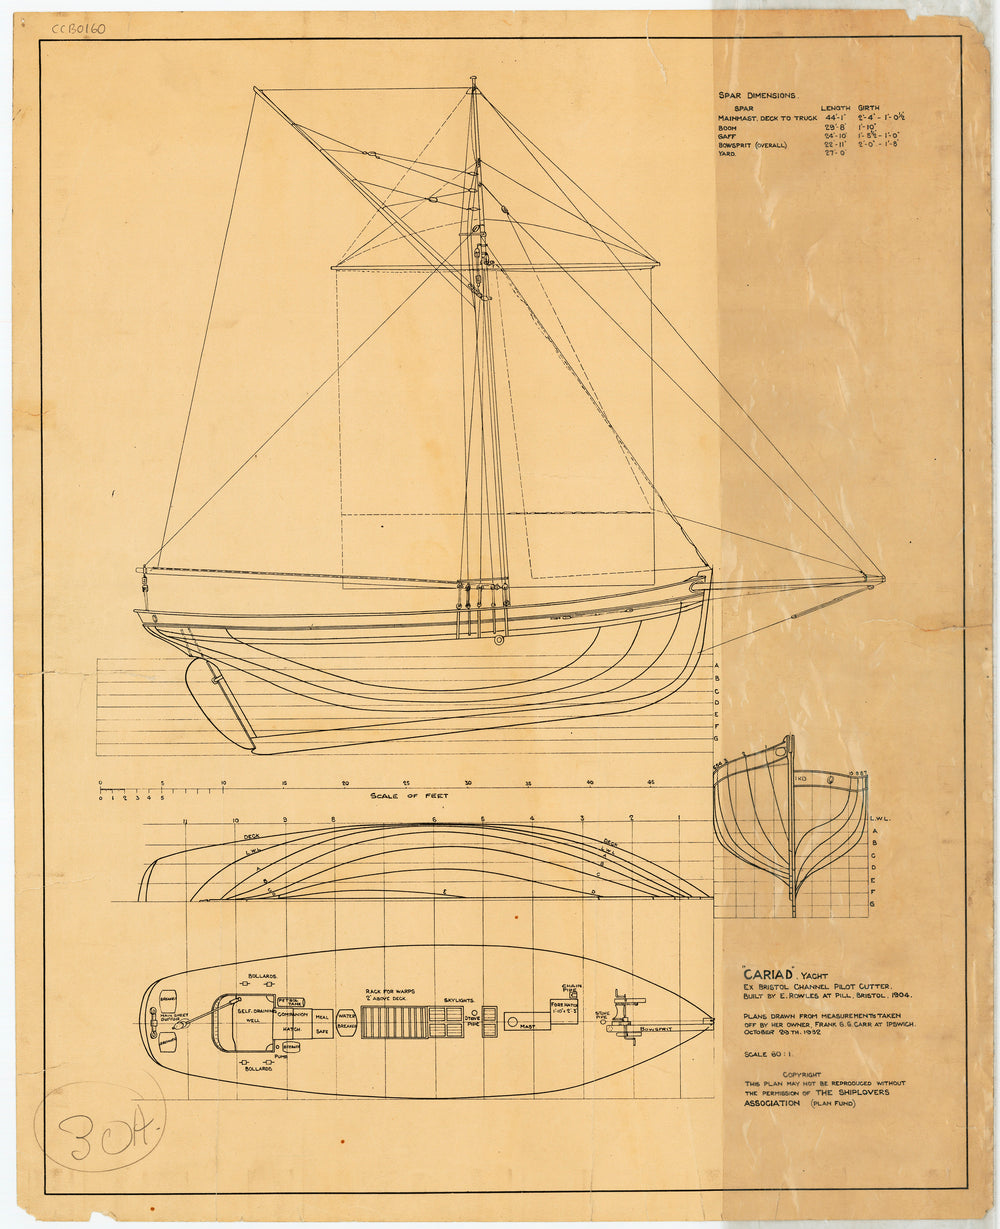 Lines & rigging plan for yacht 'Cariad' (1904) ex Bristol channel pilot cutter